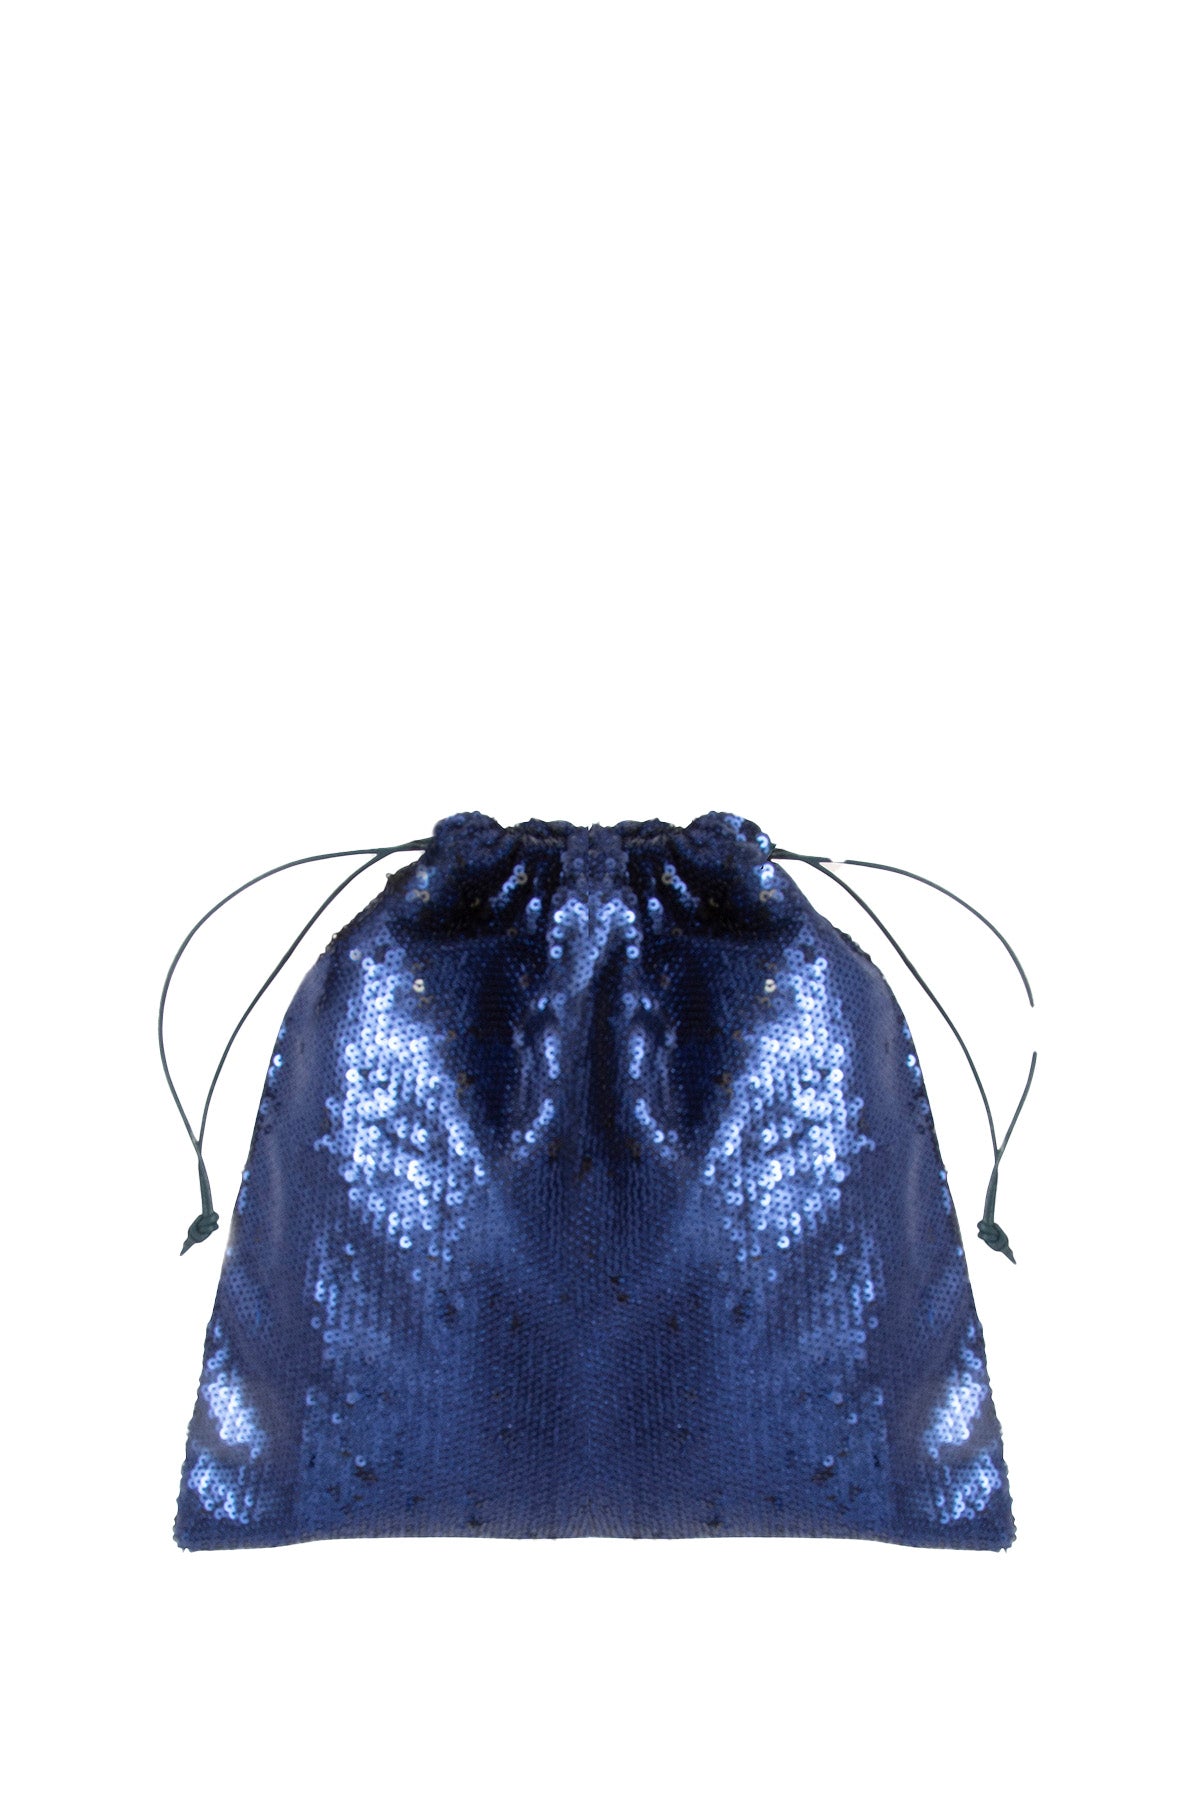 Sequin Pouch - Navy